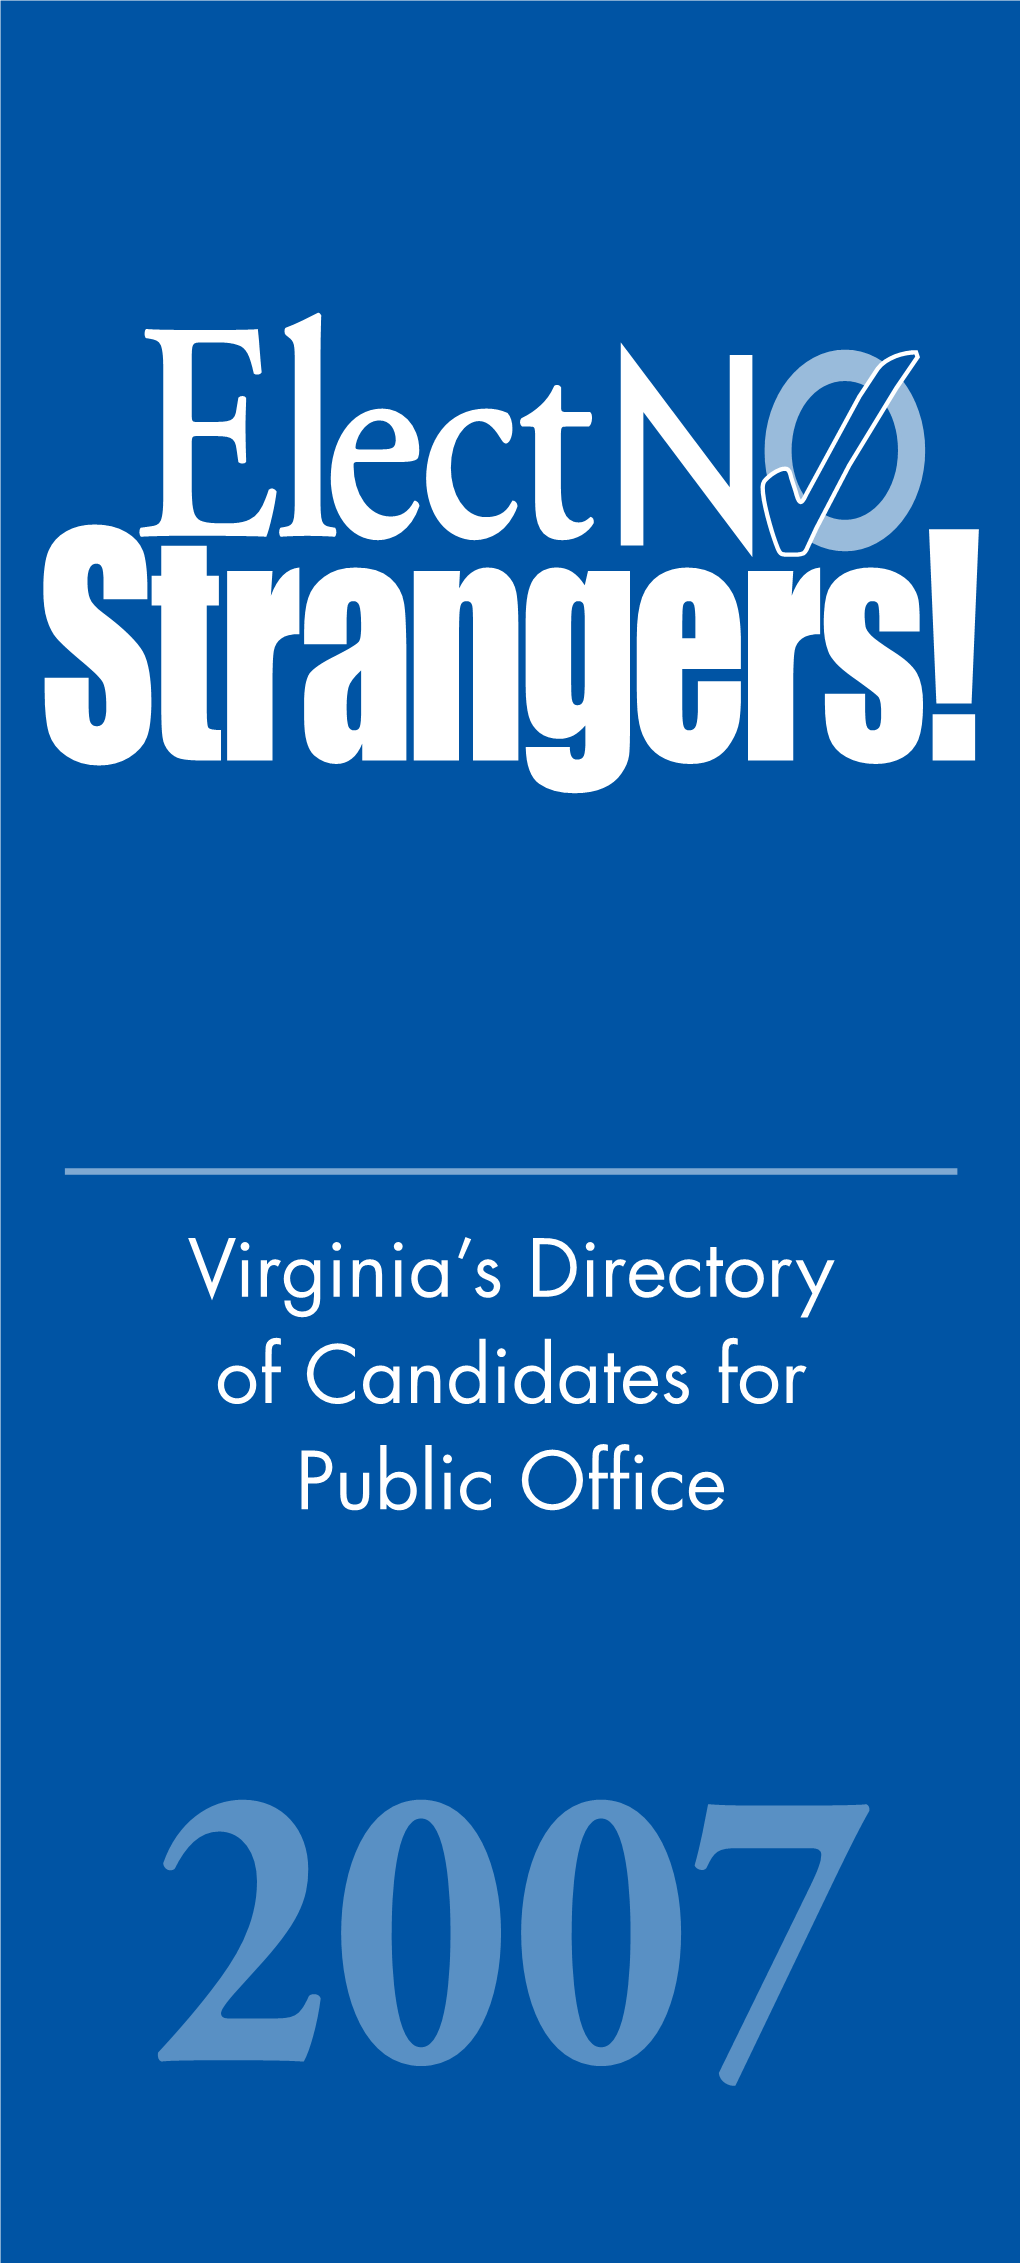 Virginia's Directory of Candidates for Public Office